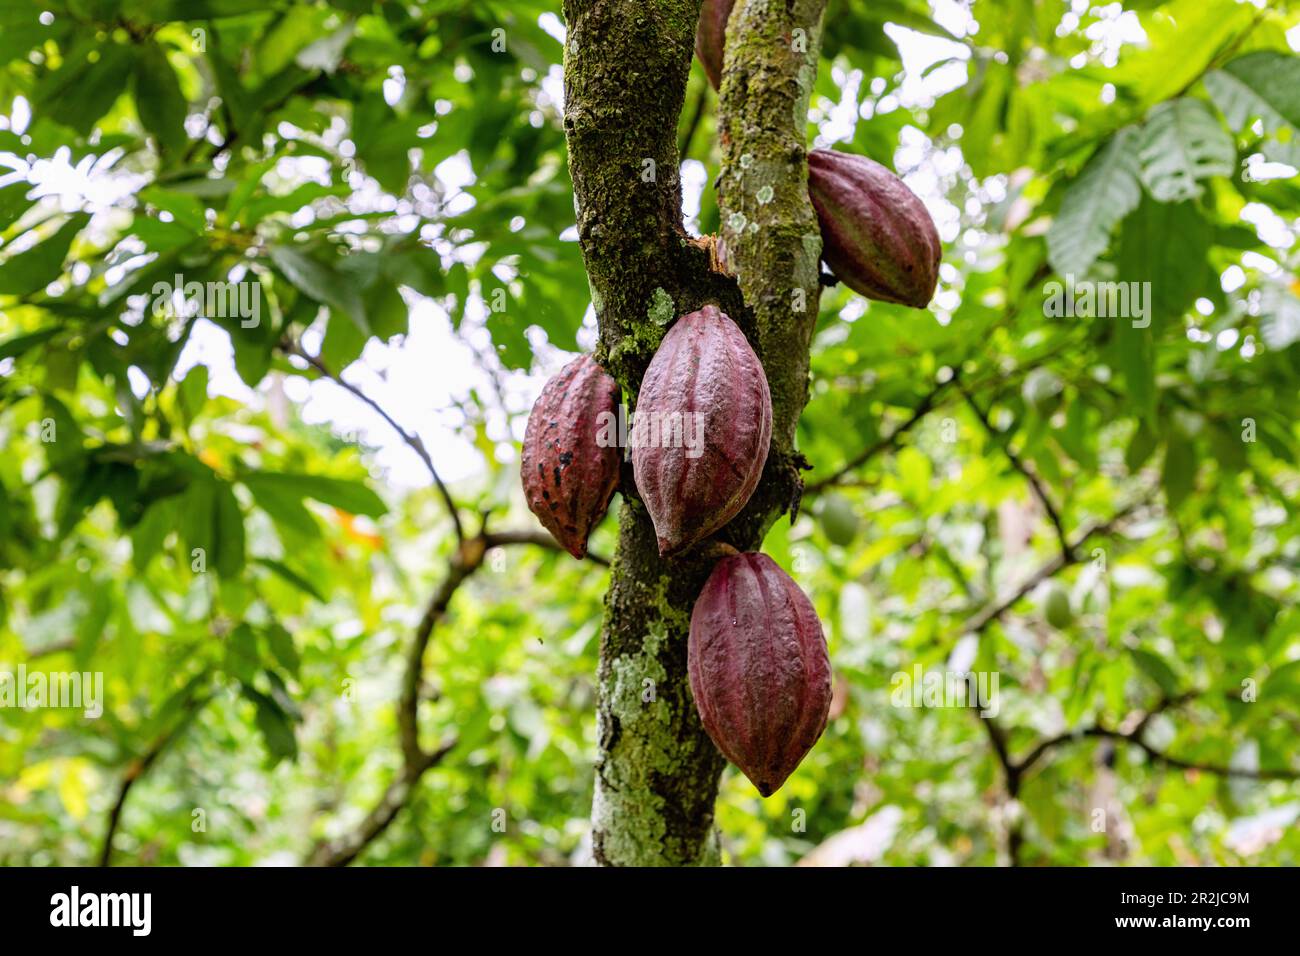 Cacao tree, Theobroma cacao, with fruit at Wli Waterfall near Hohoe in the Volta Region of eastern Ghana in West Africa Stock Photo